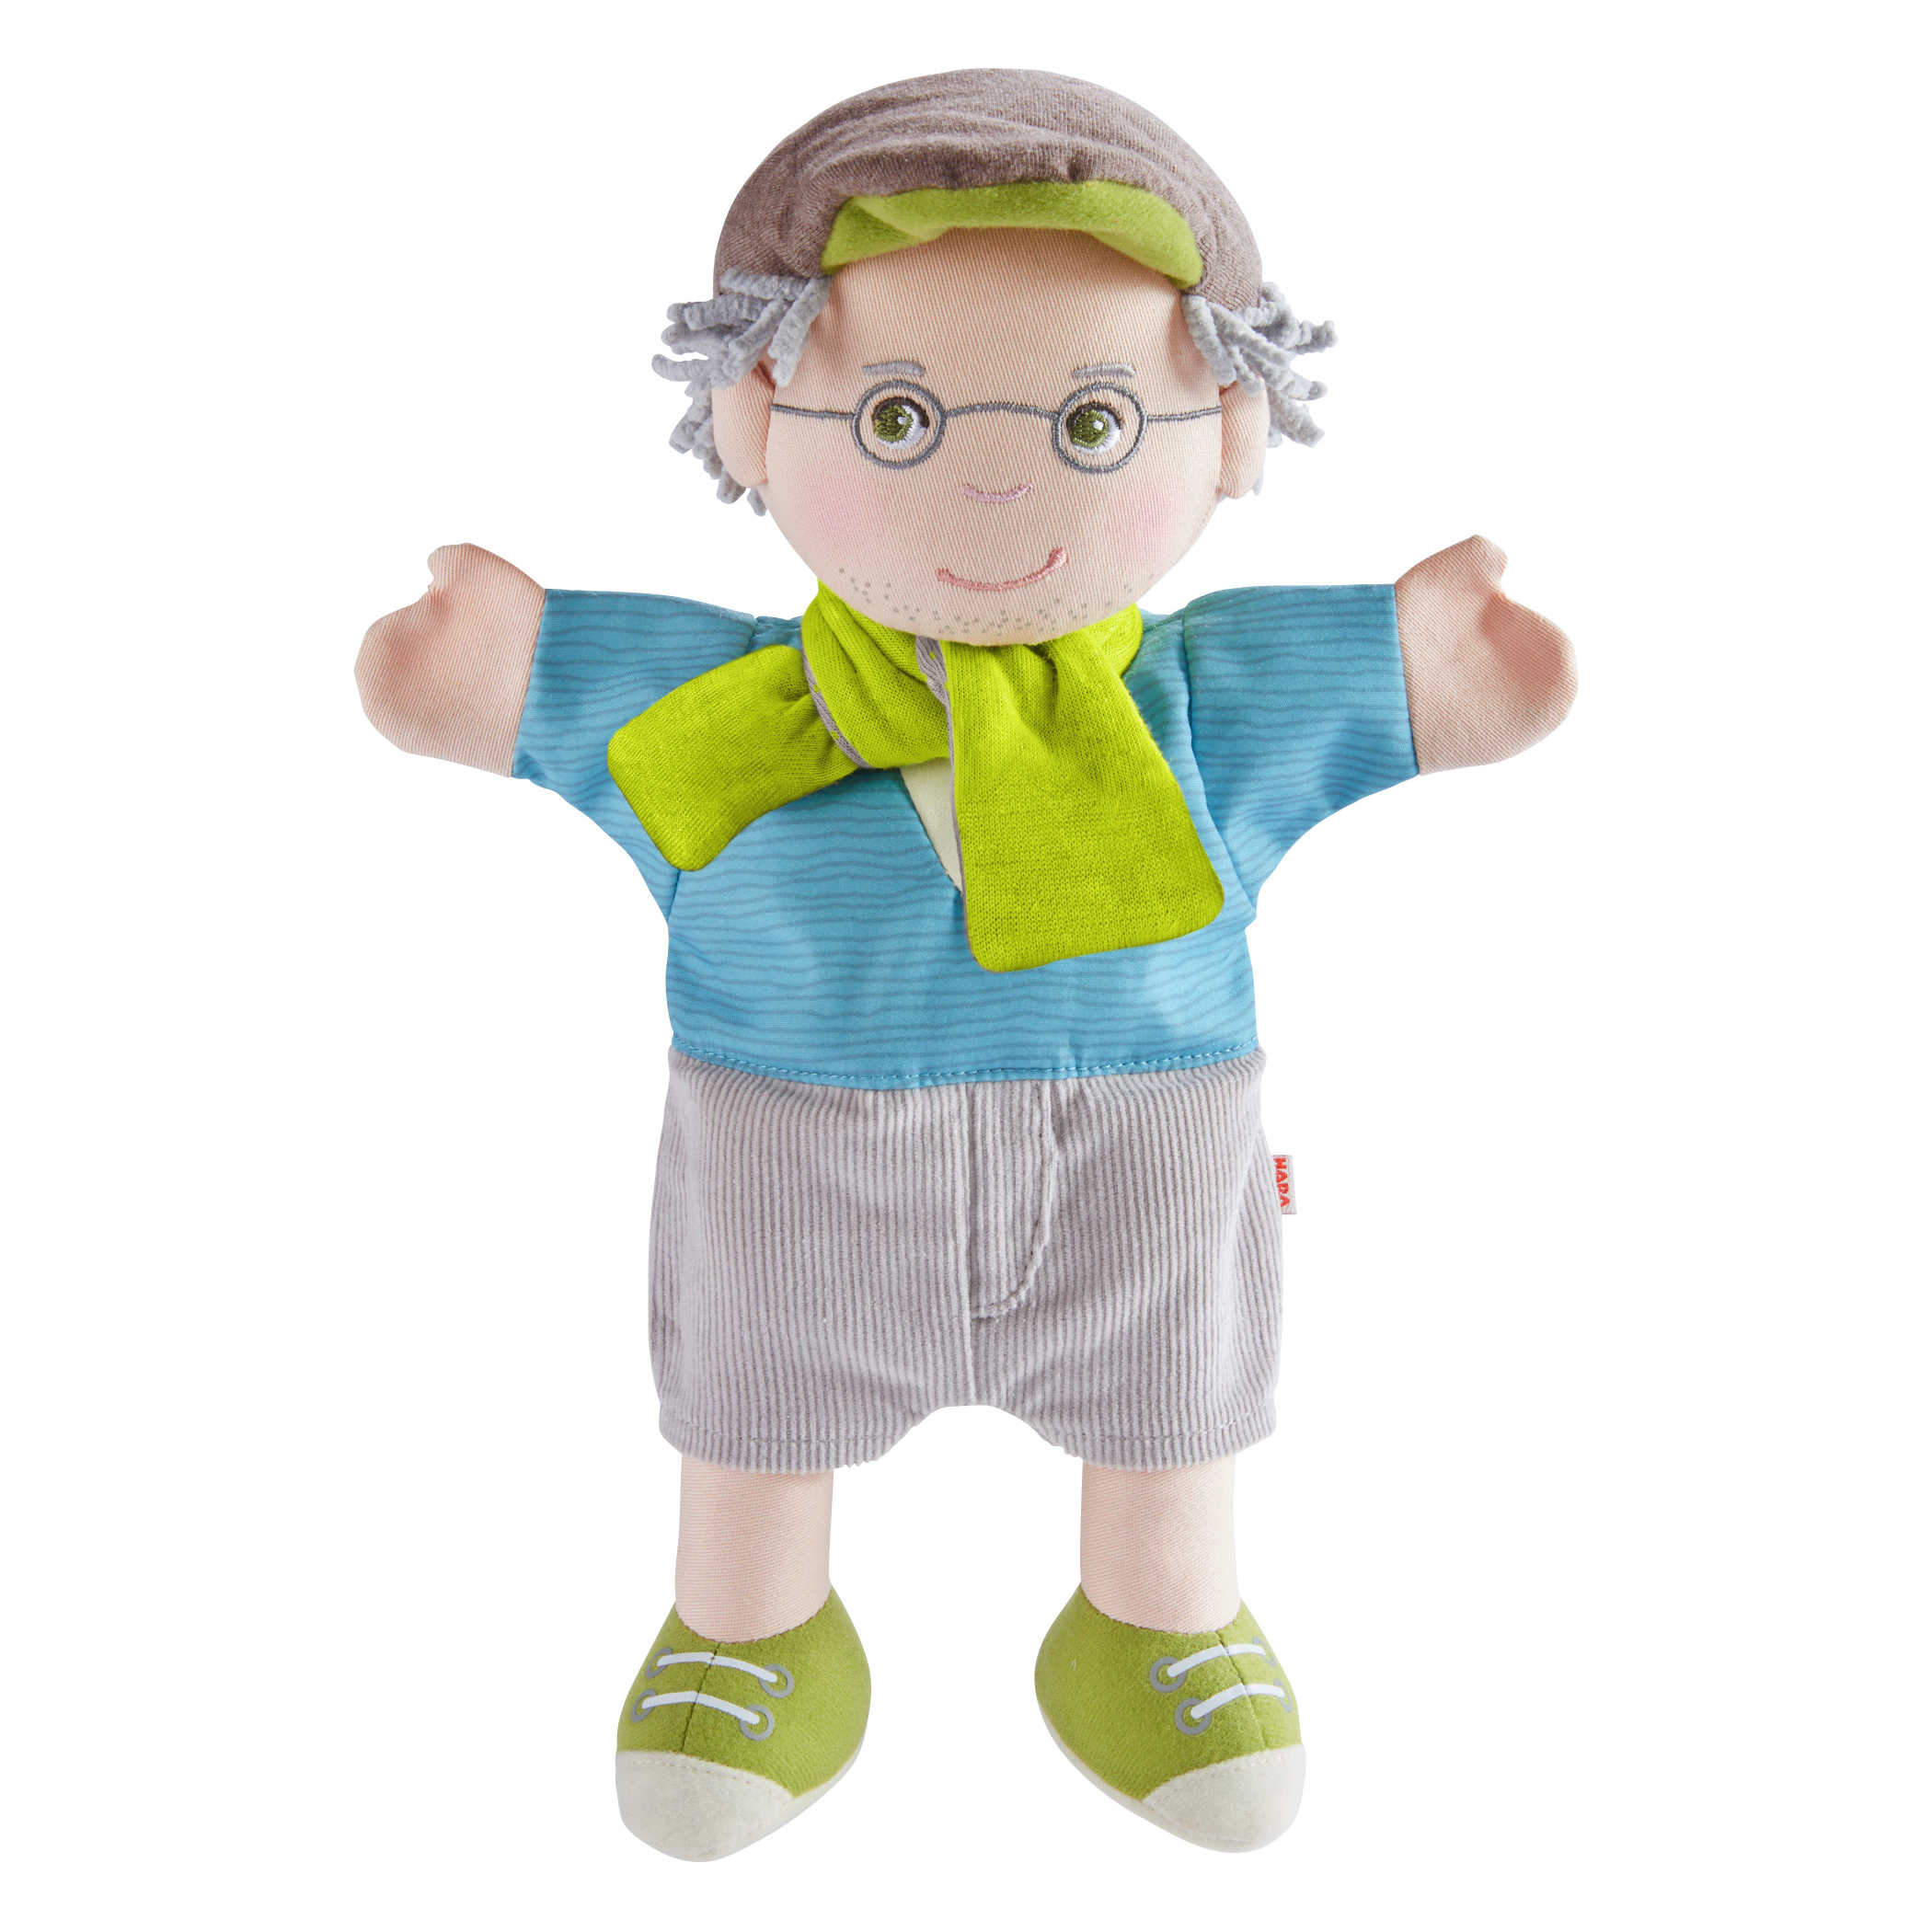 Grandpa Peter - hand puppet for babies by HABA